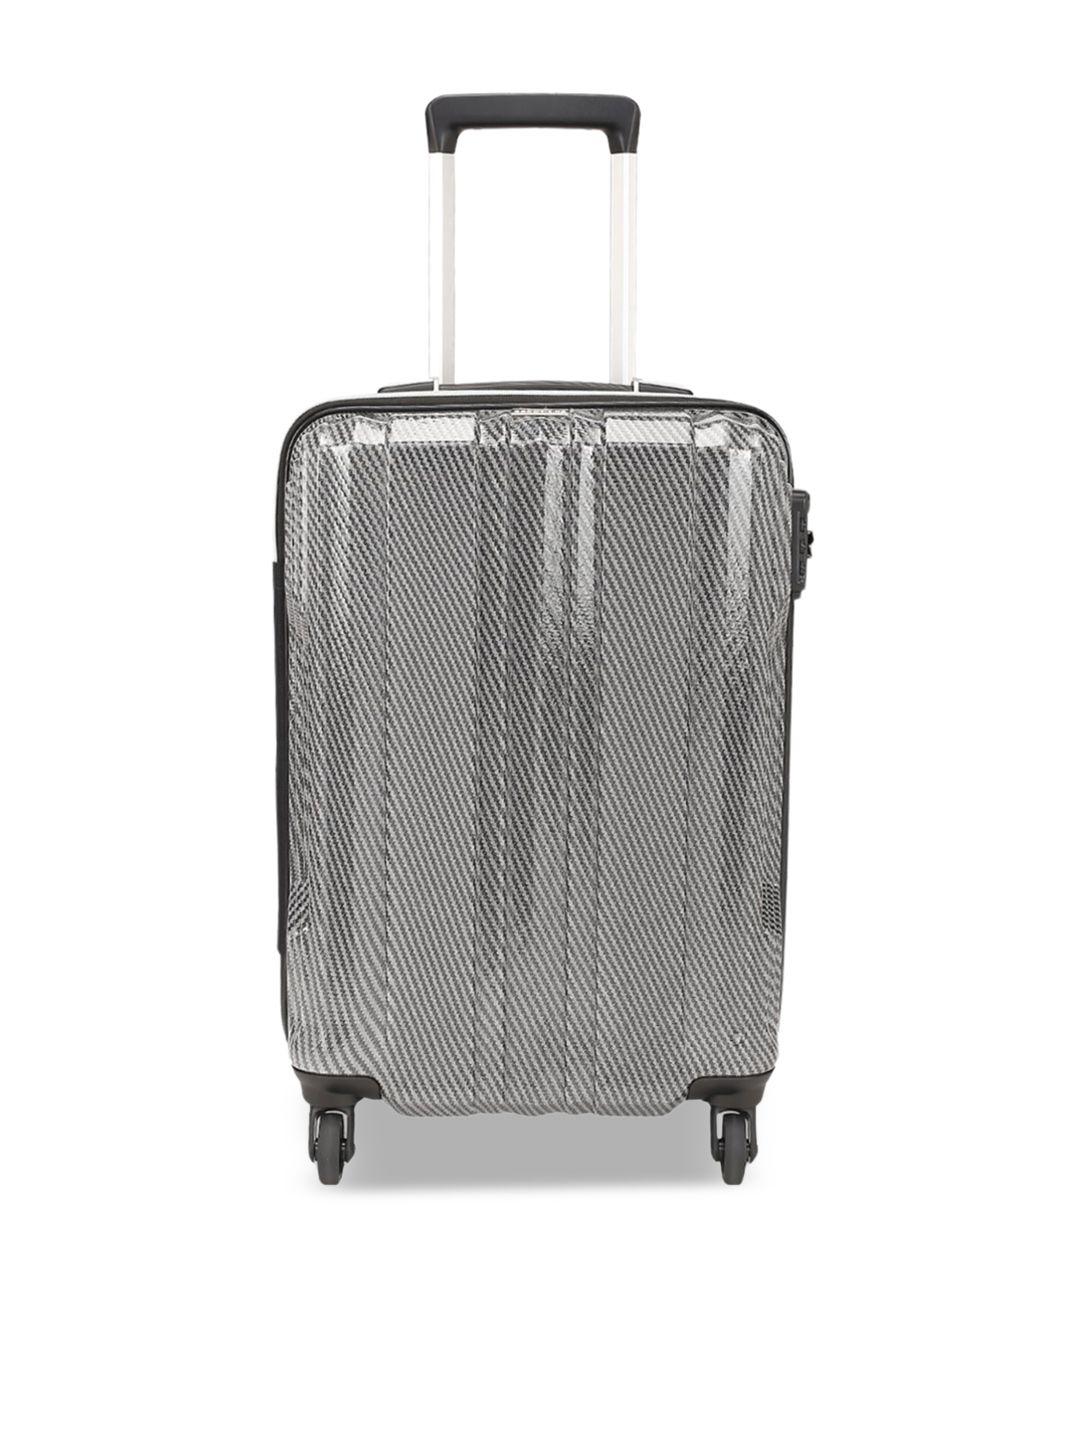 perquisite imperial series grey hard 20" cabin luggage